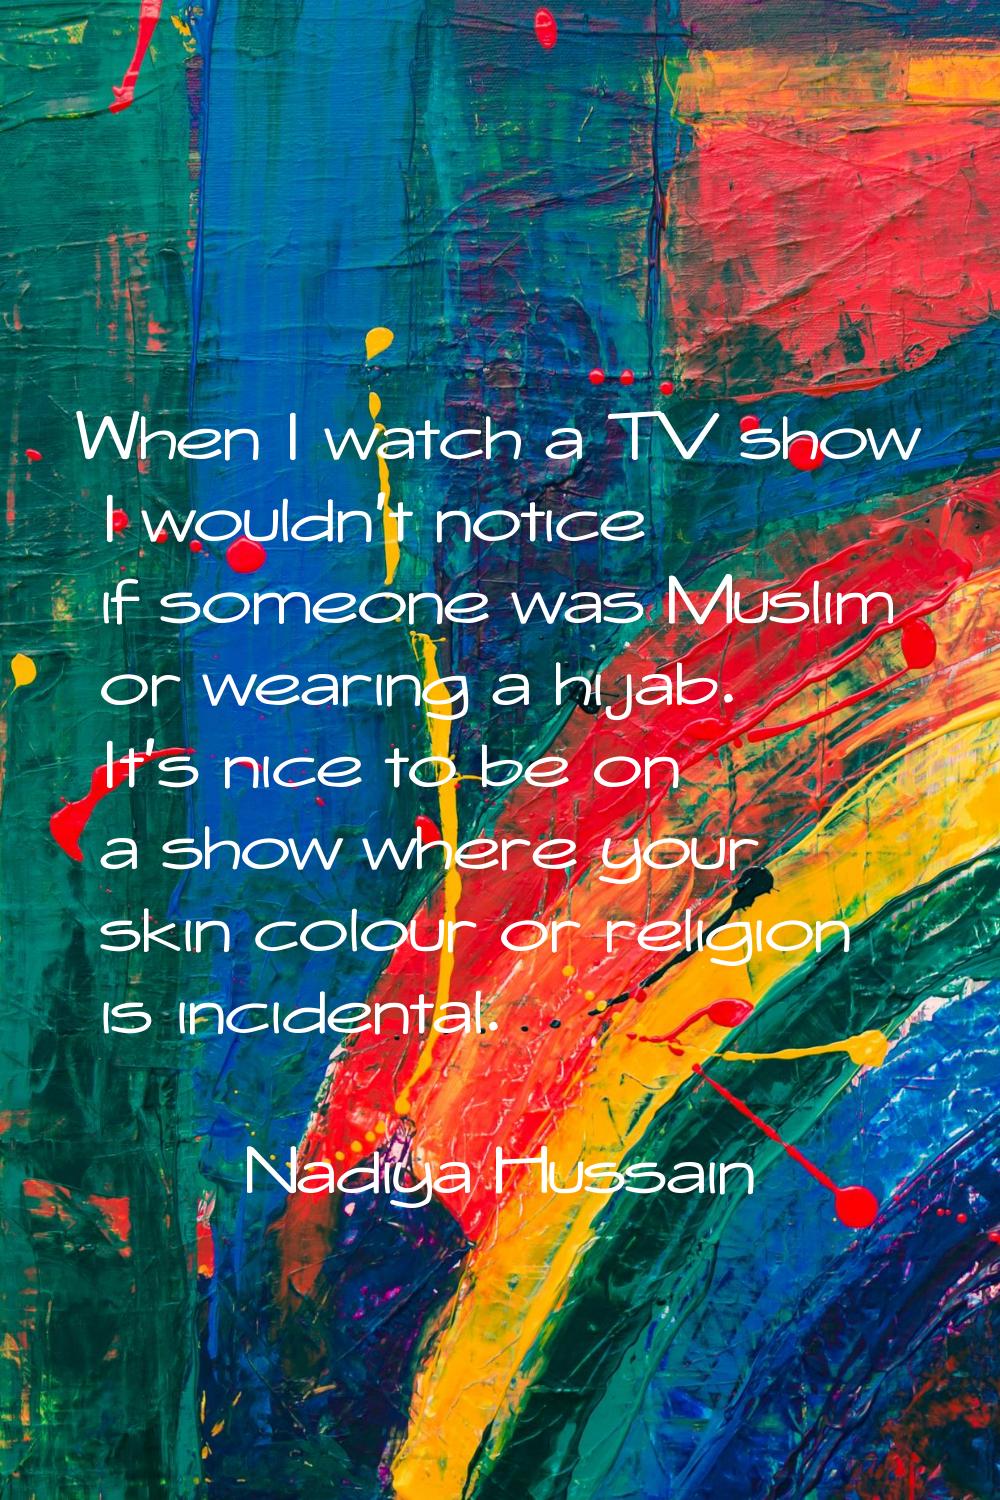 When I watch a TV show I wouldn’t notice if someone was Muslim or wearing a hijab. It’s nice to be 